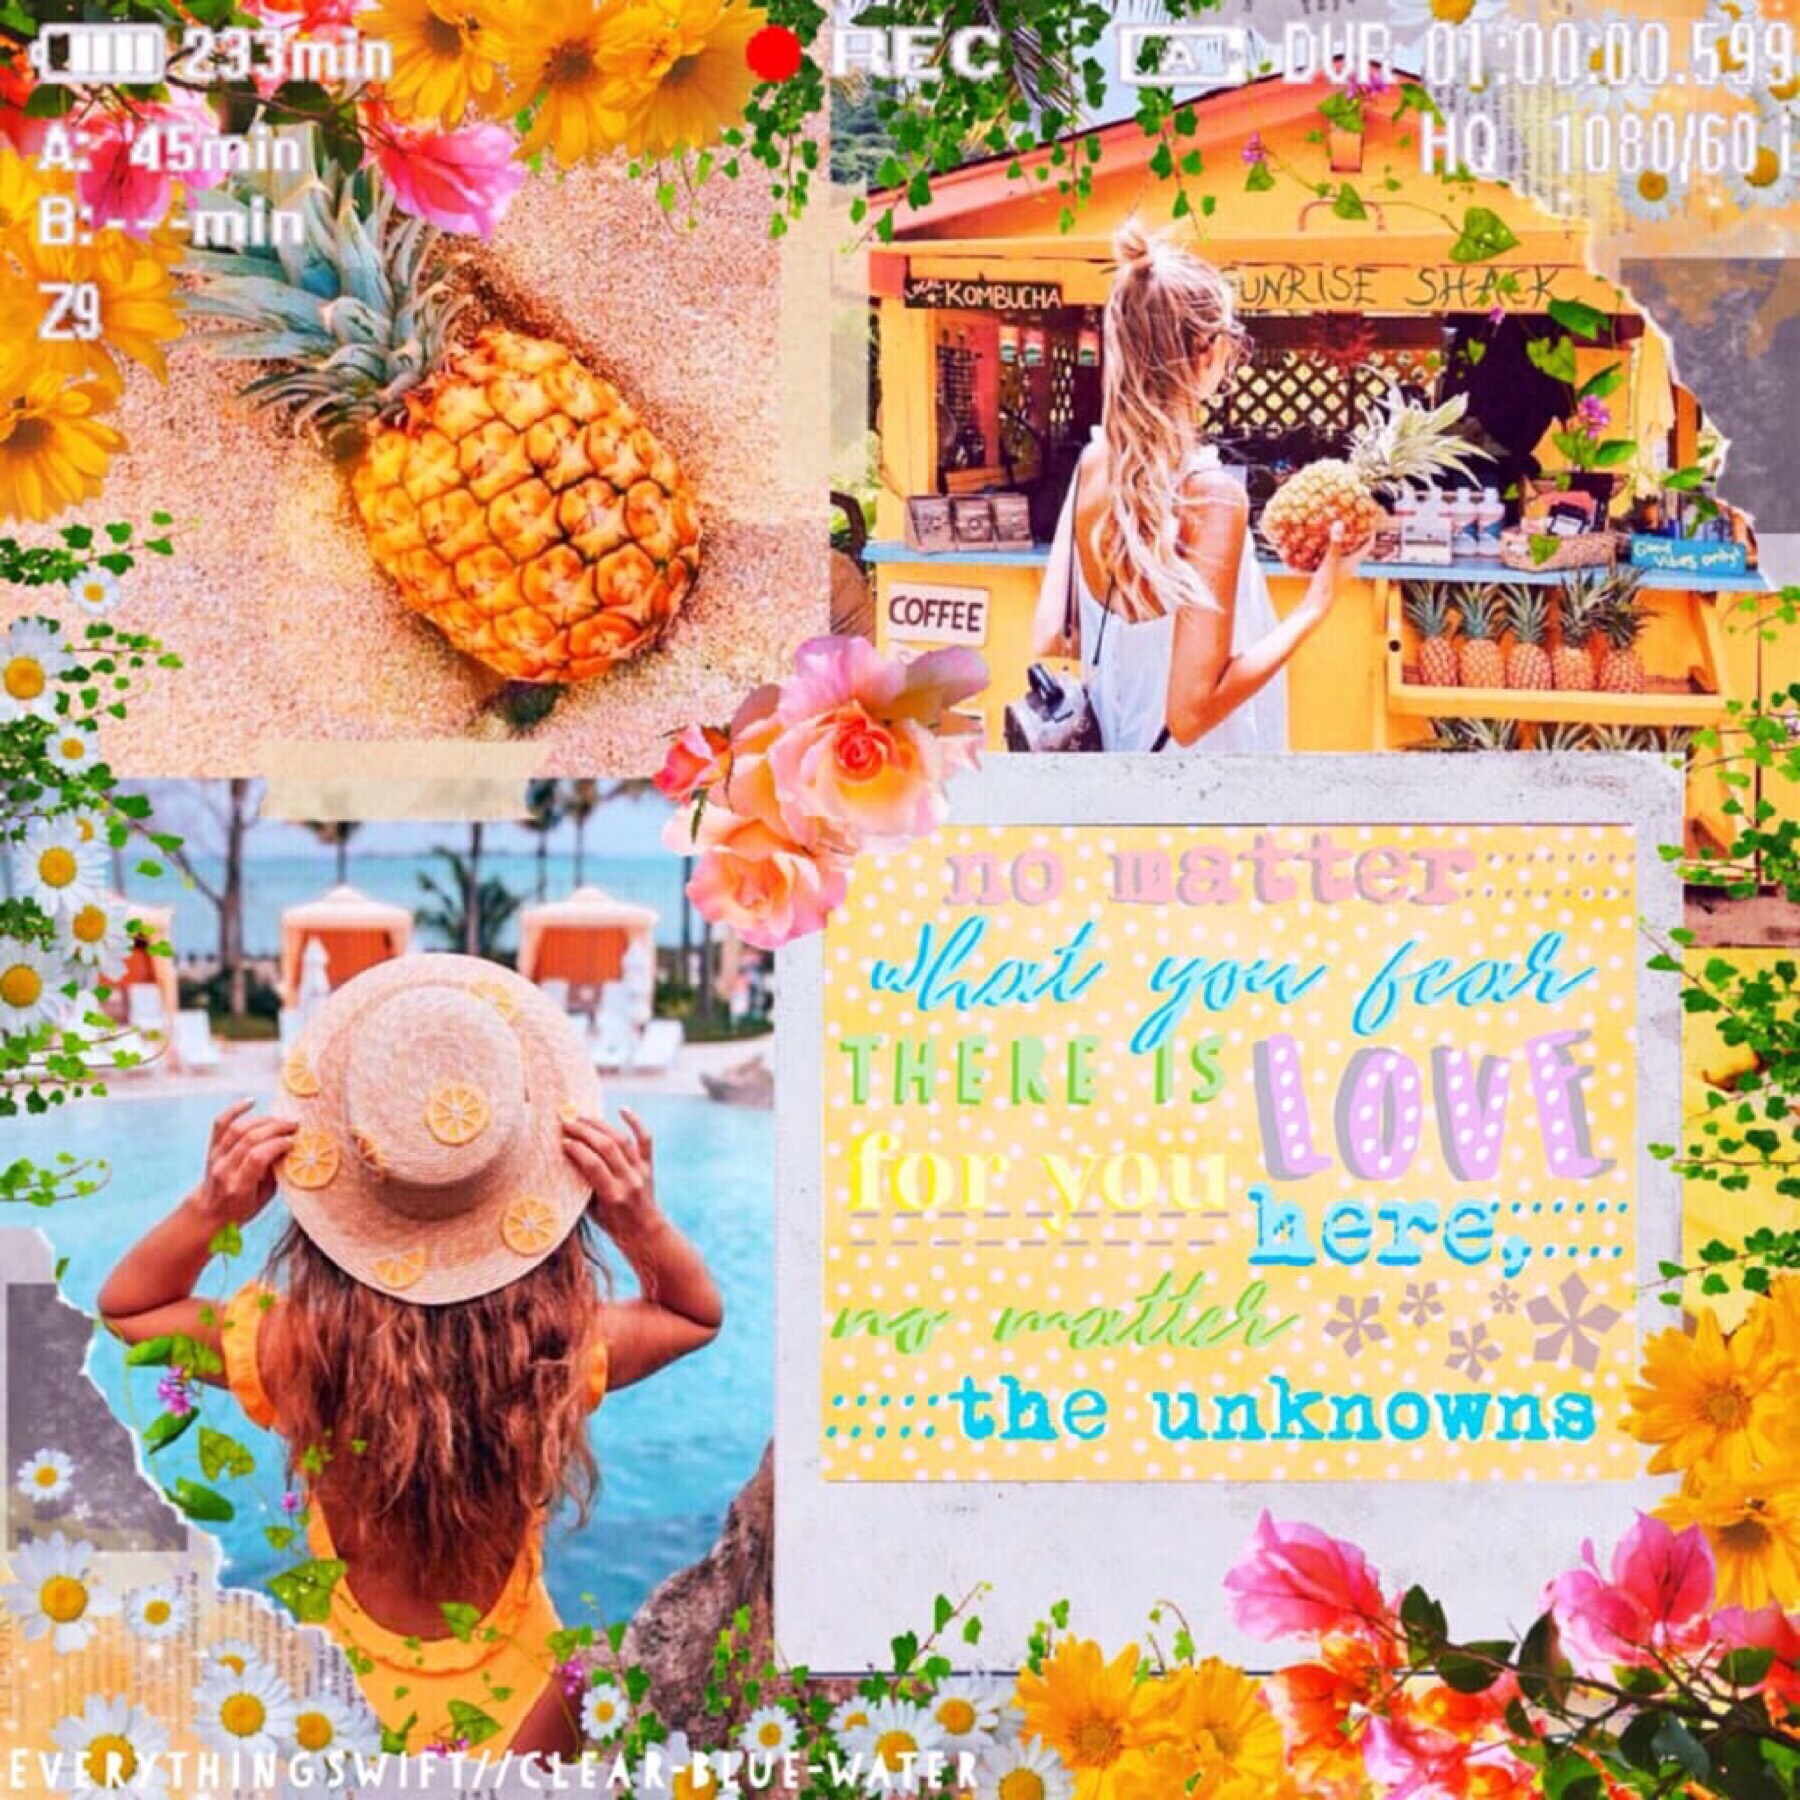 🍍T A P🍍
Collab with the amazing EverythingSwift.
This collage was glitching earlier so I hope it works now.
QOTD: Vans or Converse
AOTD: Idk, I love them both.